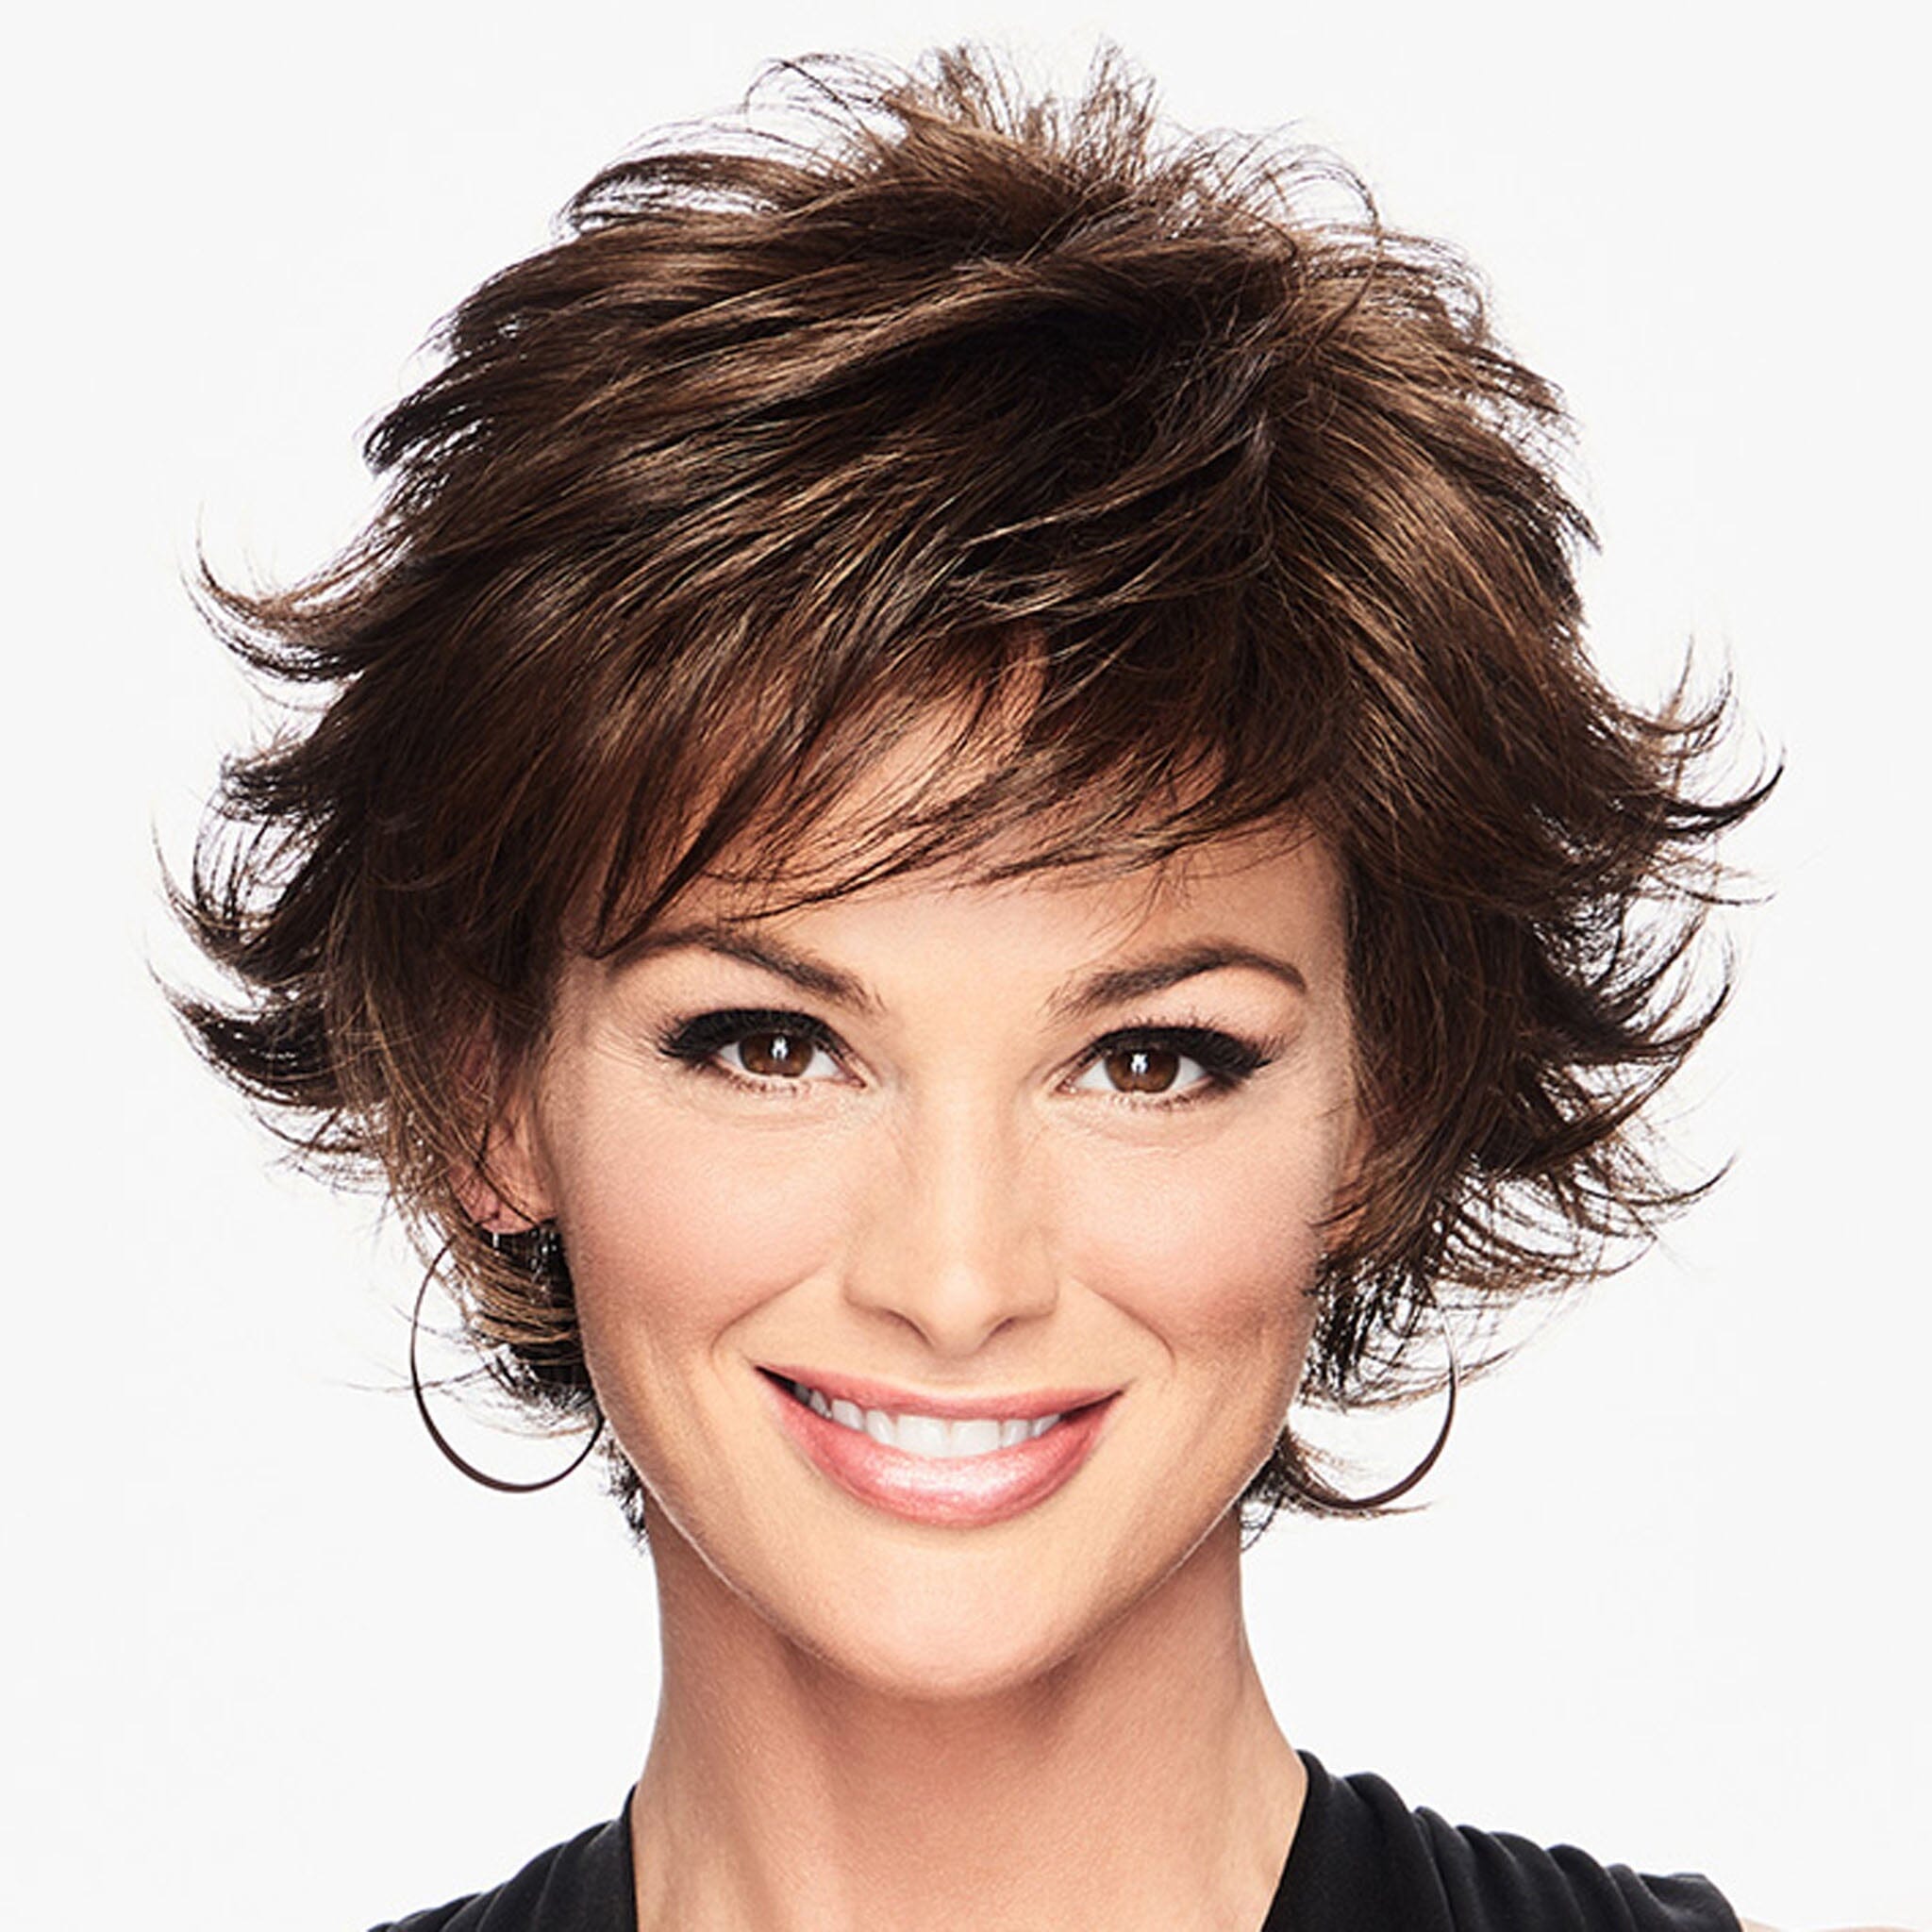 The Best Short Hair Styles for Women in Their 50s - YouTube